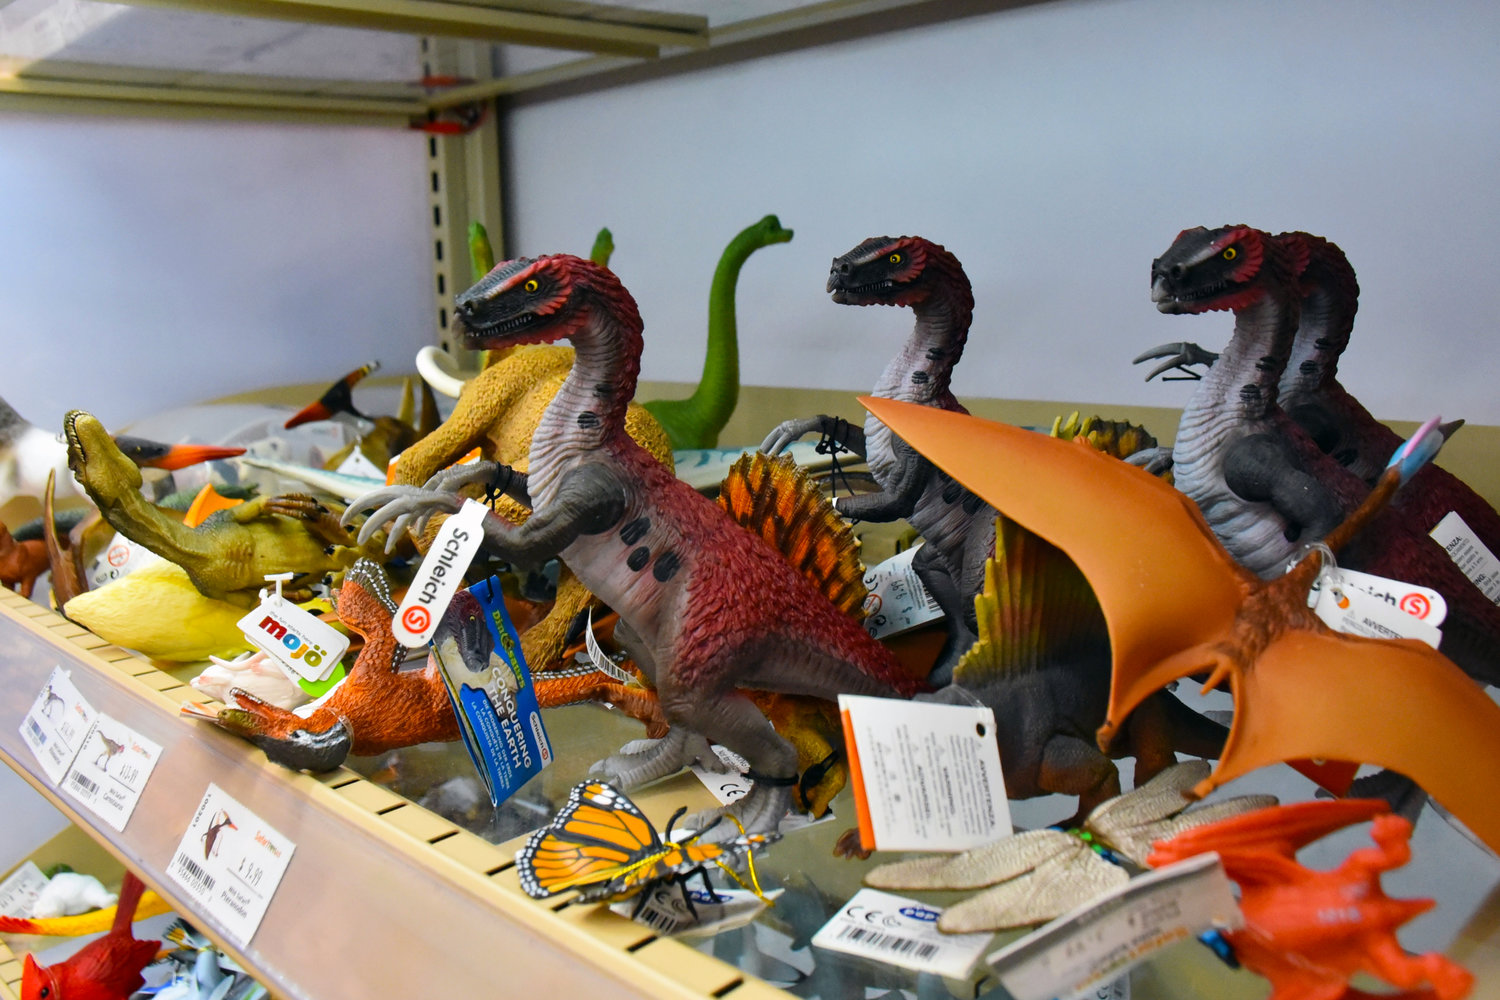 Dinosaurs sit ready to be sold at Funtime Toys and Gifts in Yelm.